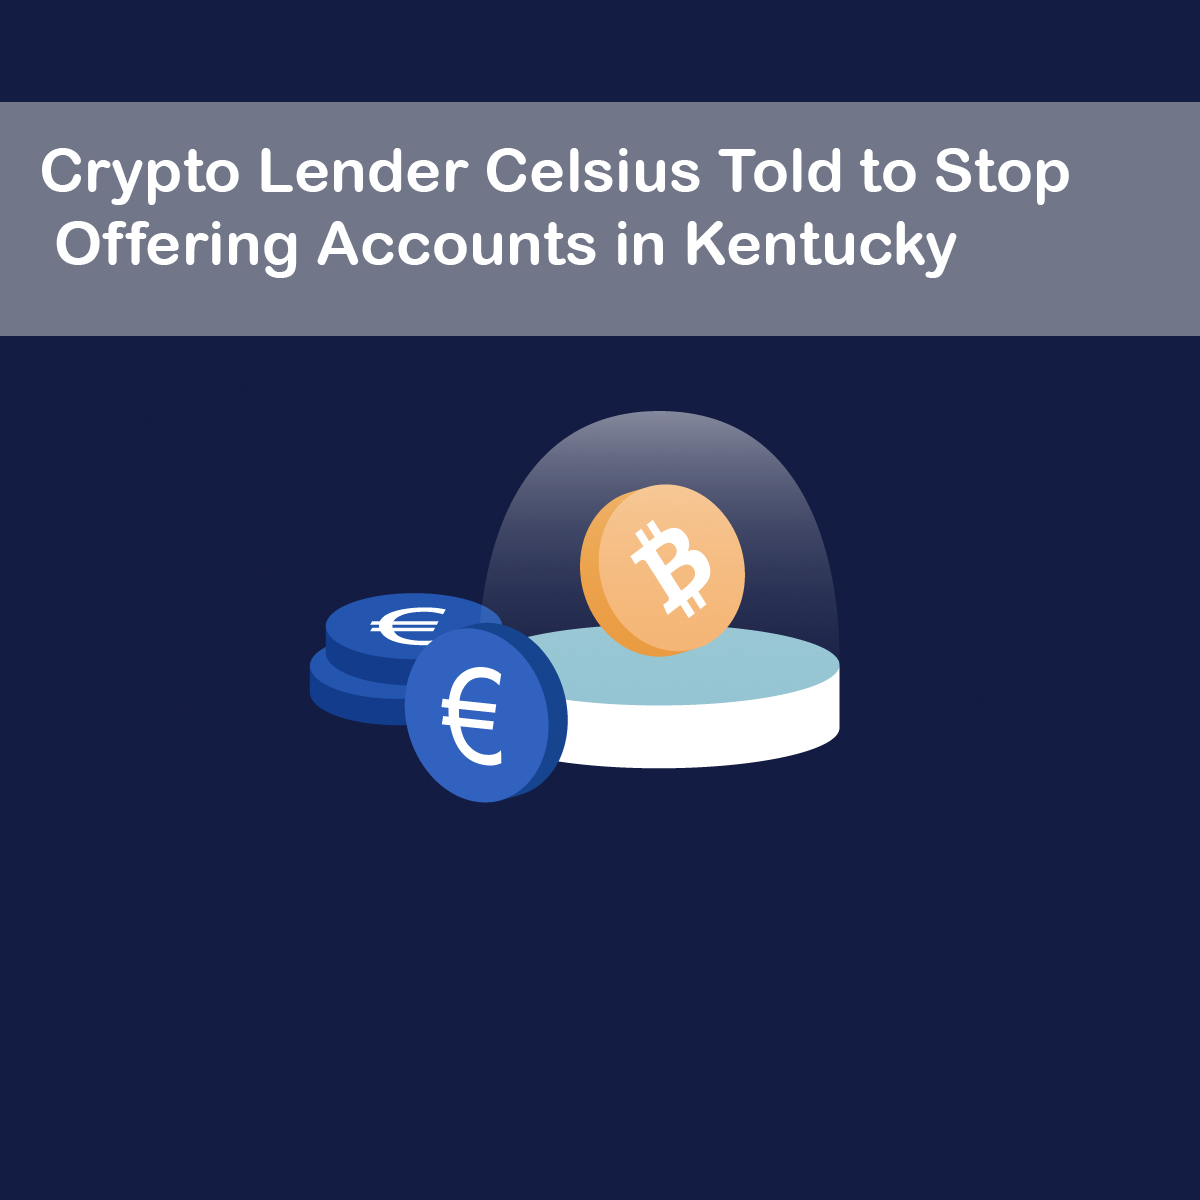 Crypto Lender Celsius Told to Stop Offering Accounts in Kentucky